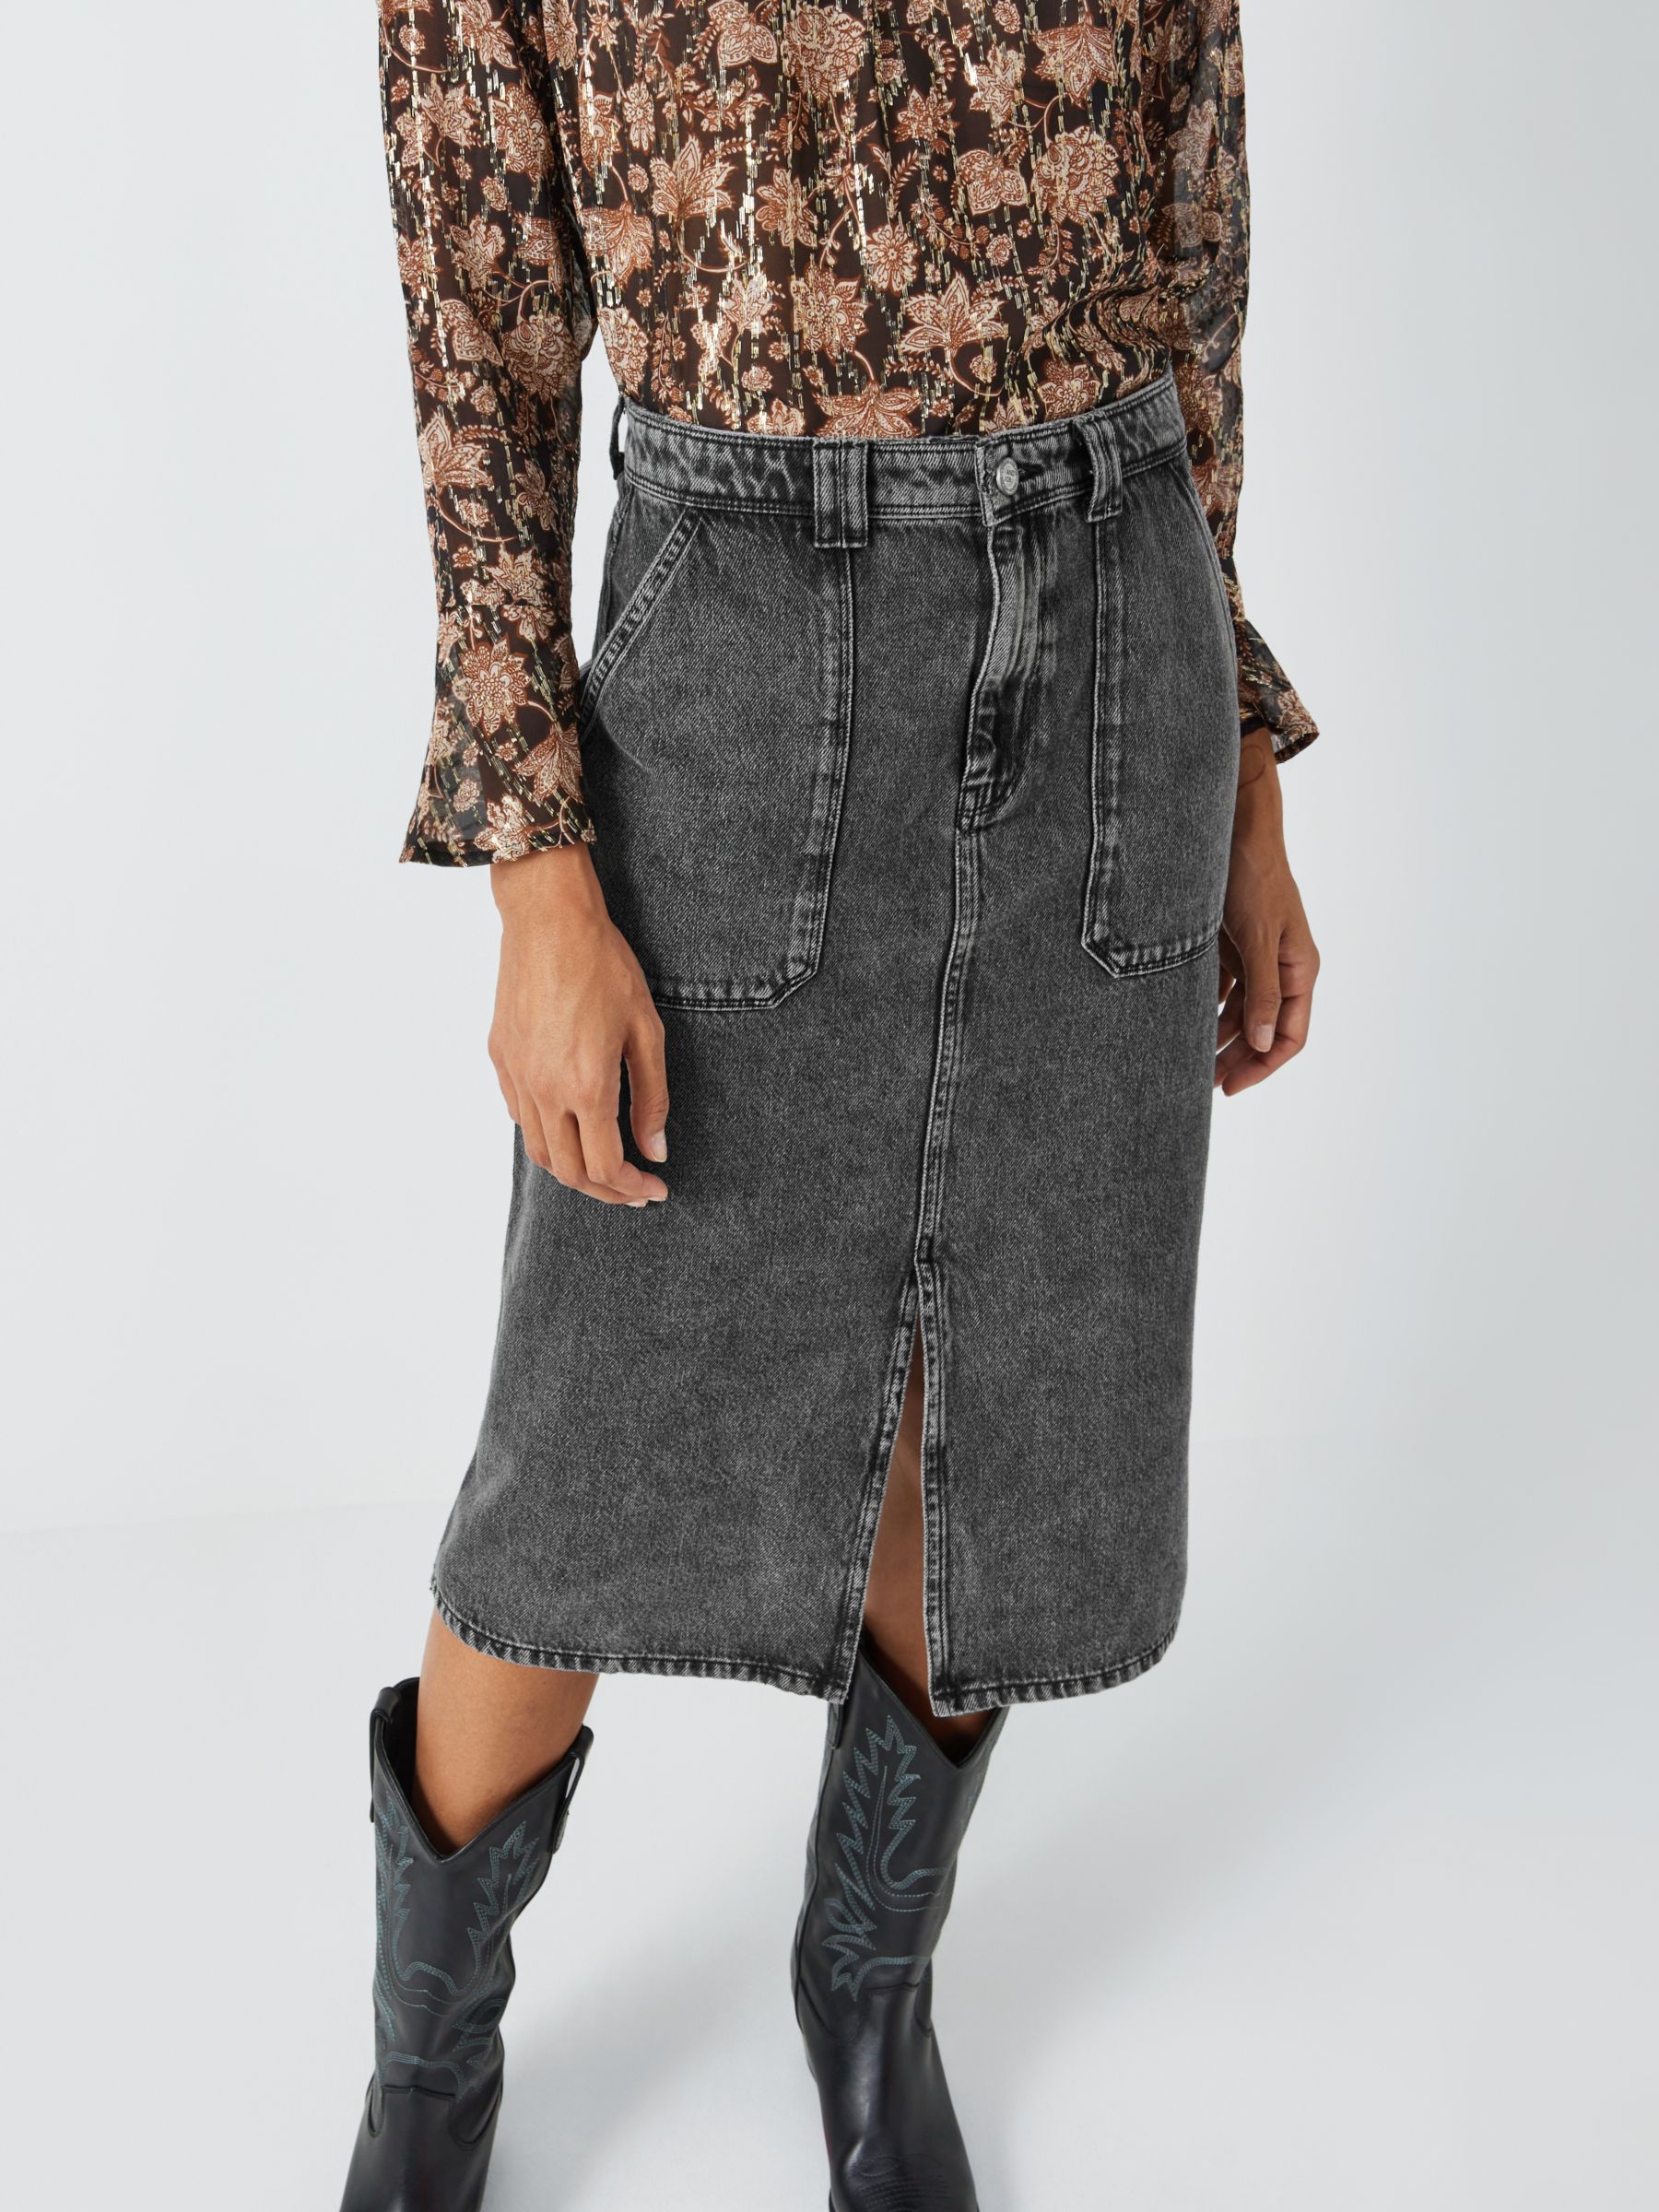 AND/OR Jonie Denim Skirt, Washed Grey at John Lewis & Partners